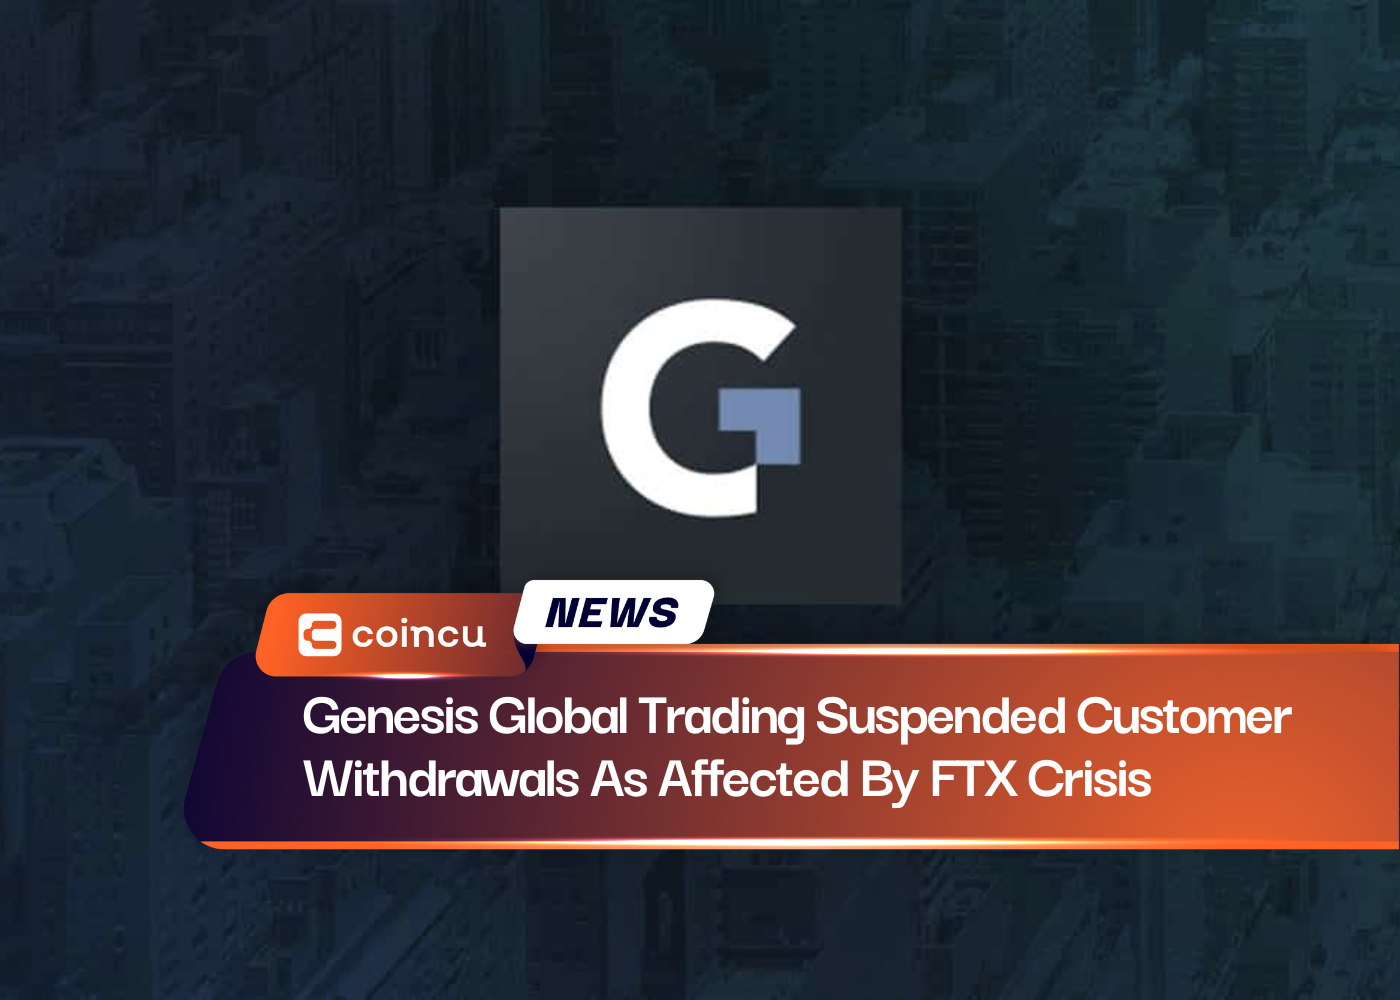 Genesis Global Trading Suspended Customer Withdrawals As Affected By FTX Crisis